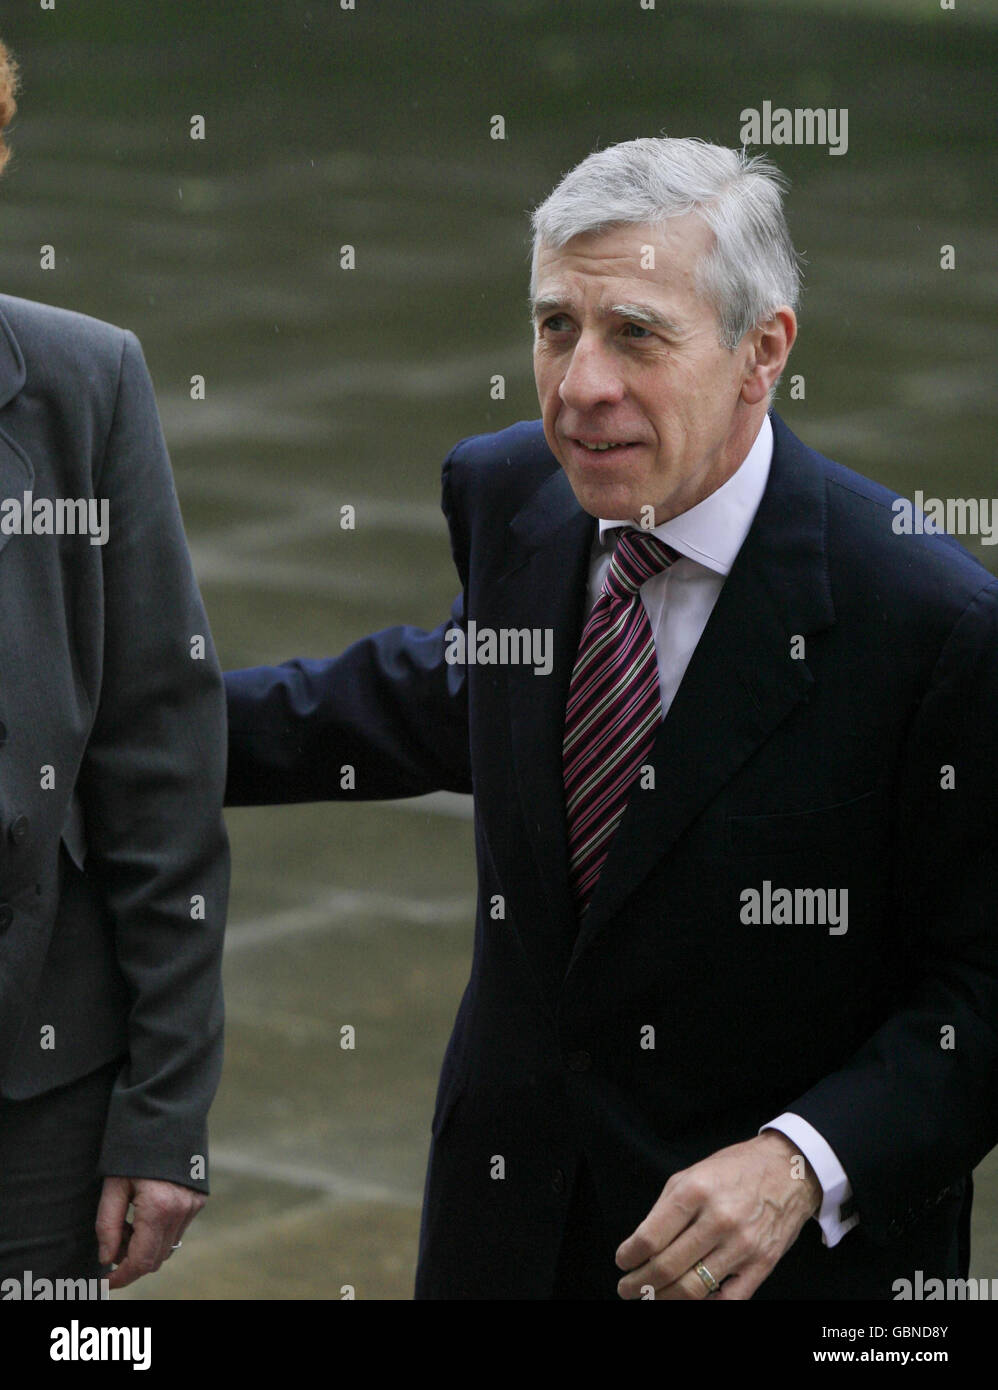 The Justice Minister Jack Straw arrives at Camberwell Green Magistrates' Court in south London, where he will watch a mock-up of a 'virtual court' with actors playing the role of defendants during a live video link between the court and Charing Cross police station in central London. Stock Photo